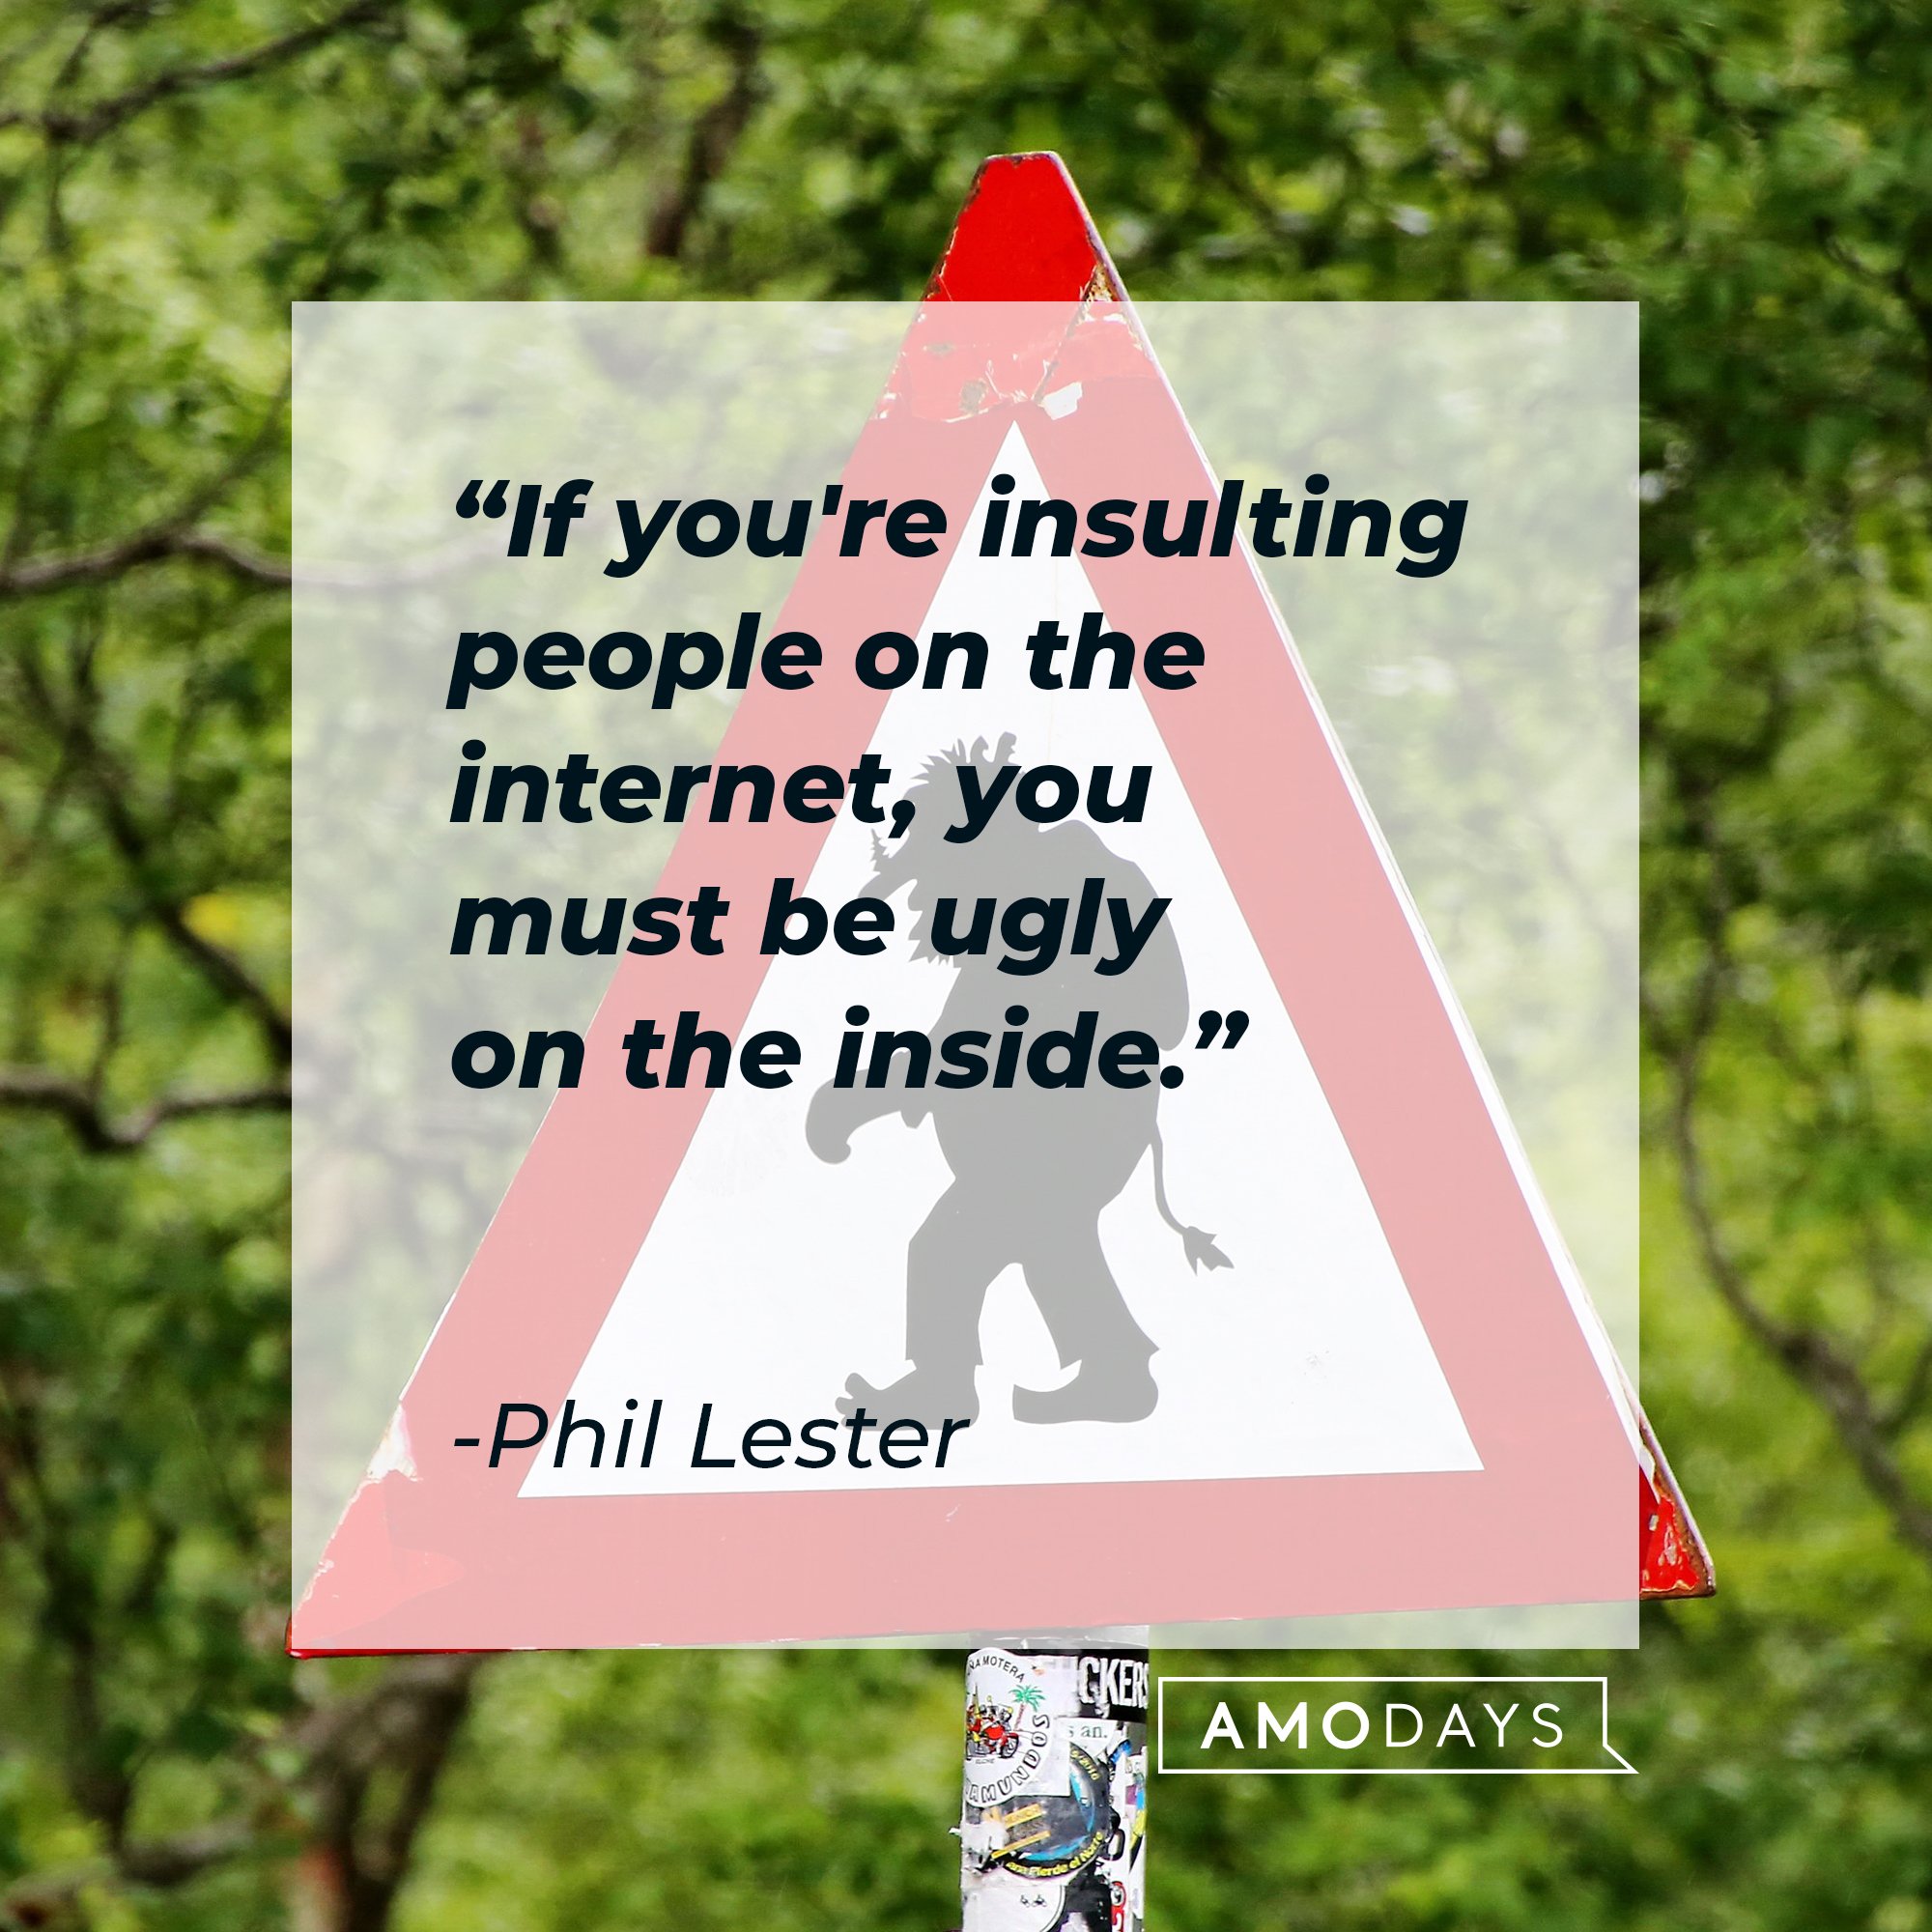 Phil Lester's quote: "If you're insulting people on the internet, you must be ugly on the inside." | Image: AmoDays